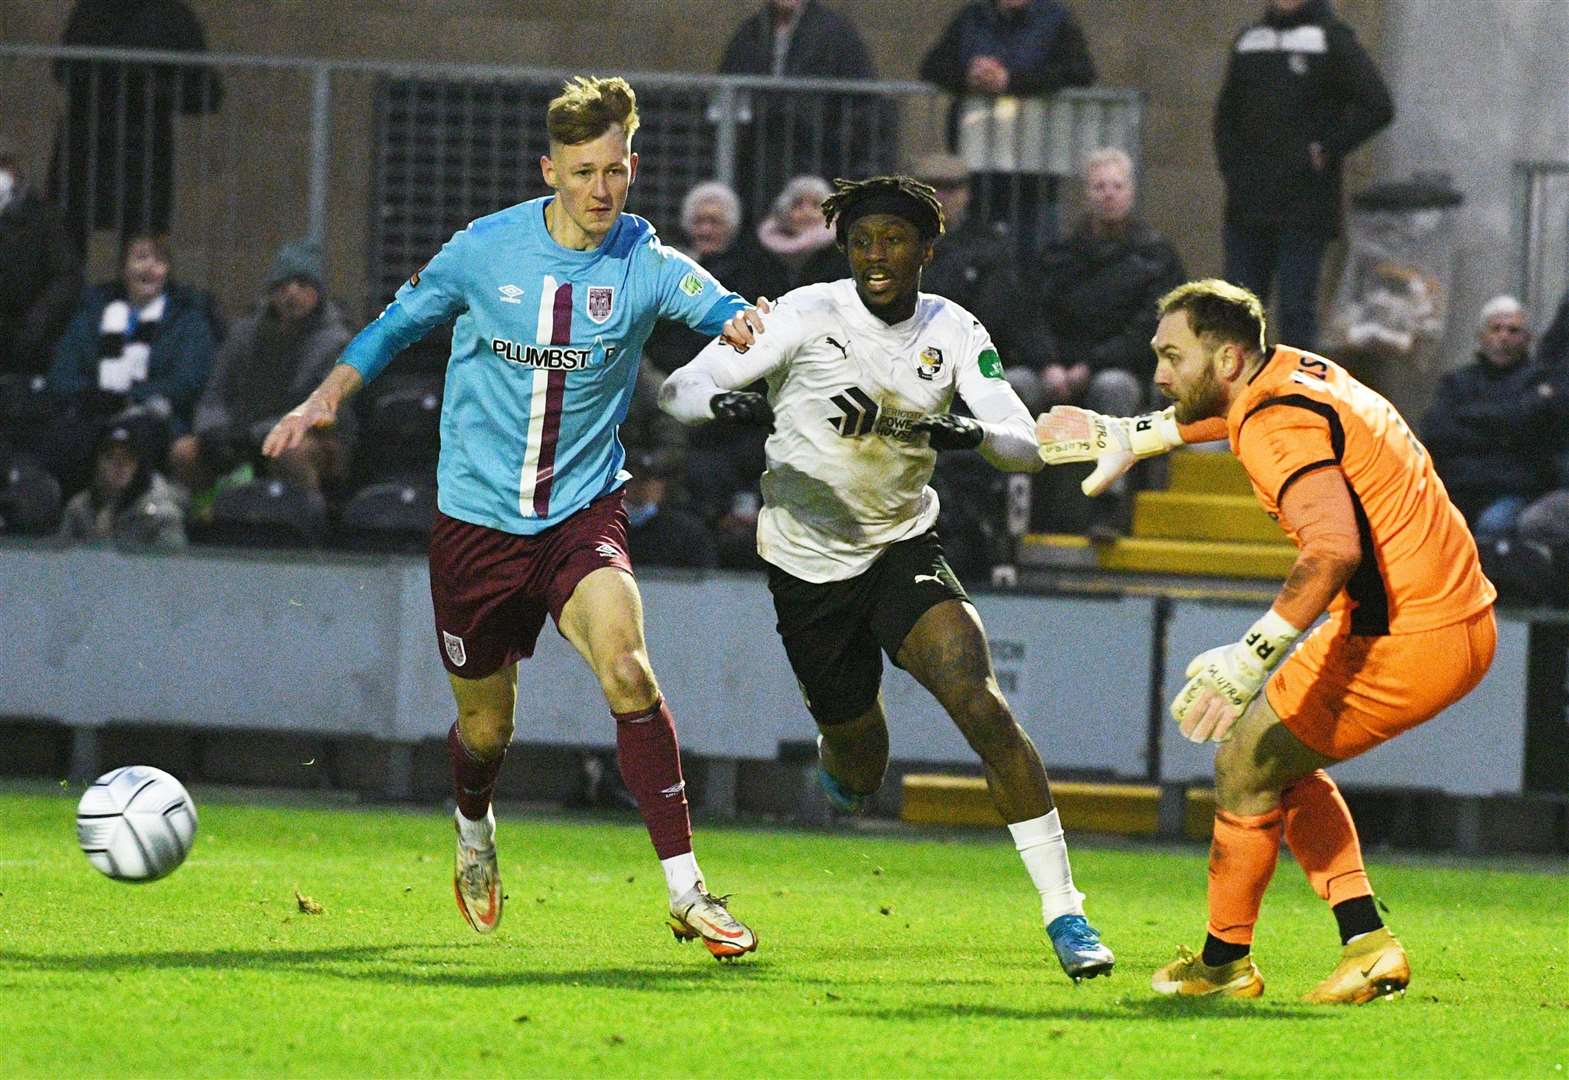 Dartford's Ade Azeez causes panic in the Weymouth defence. Picture: Barry Goodwin (54285187)